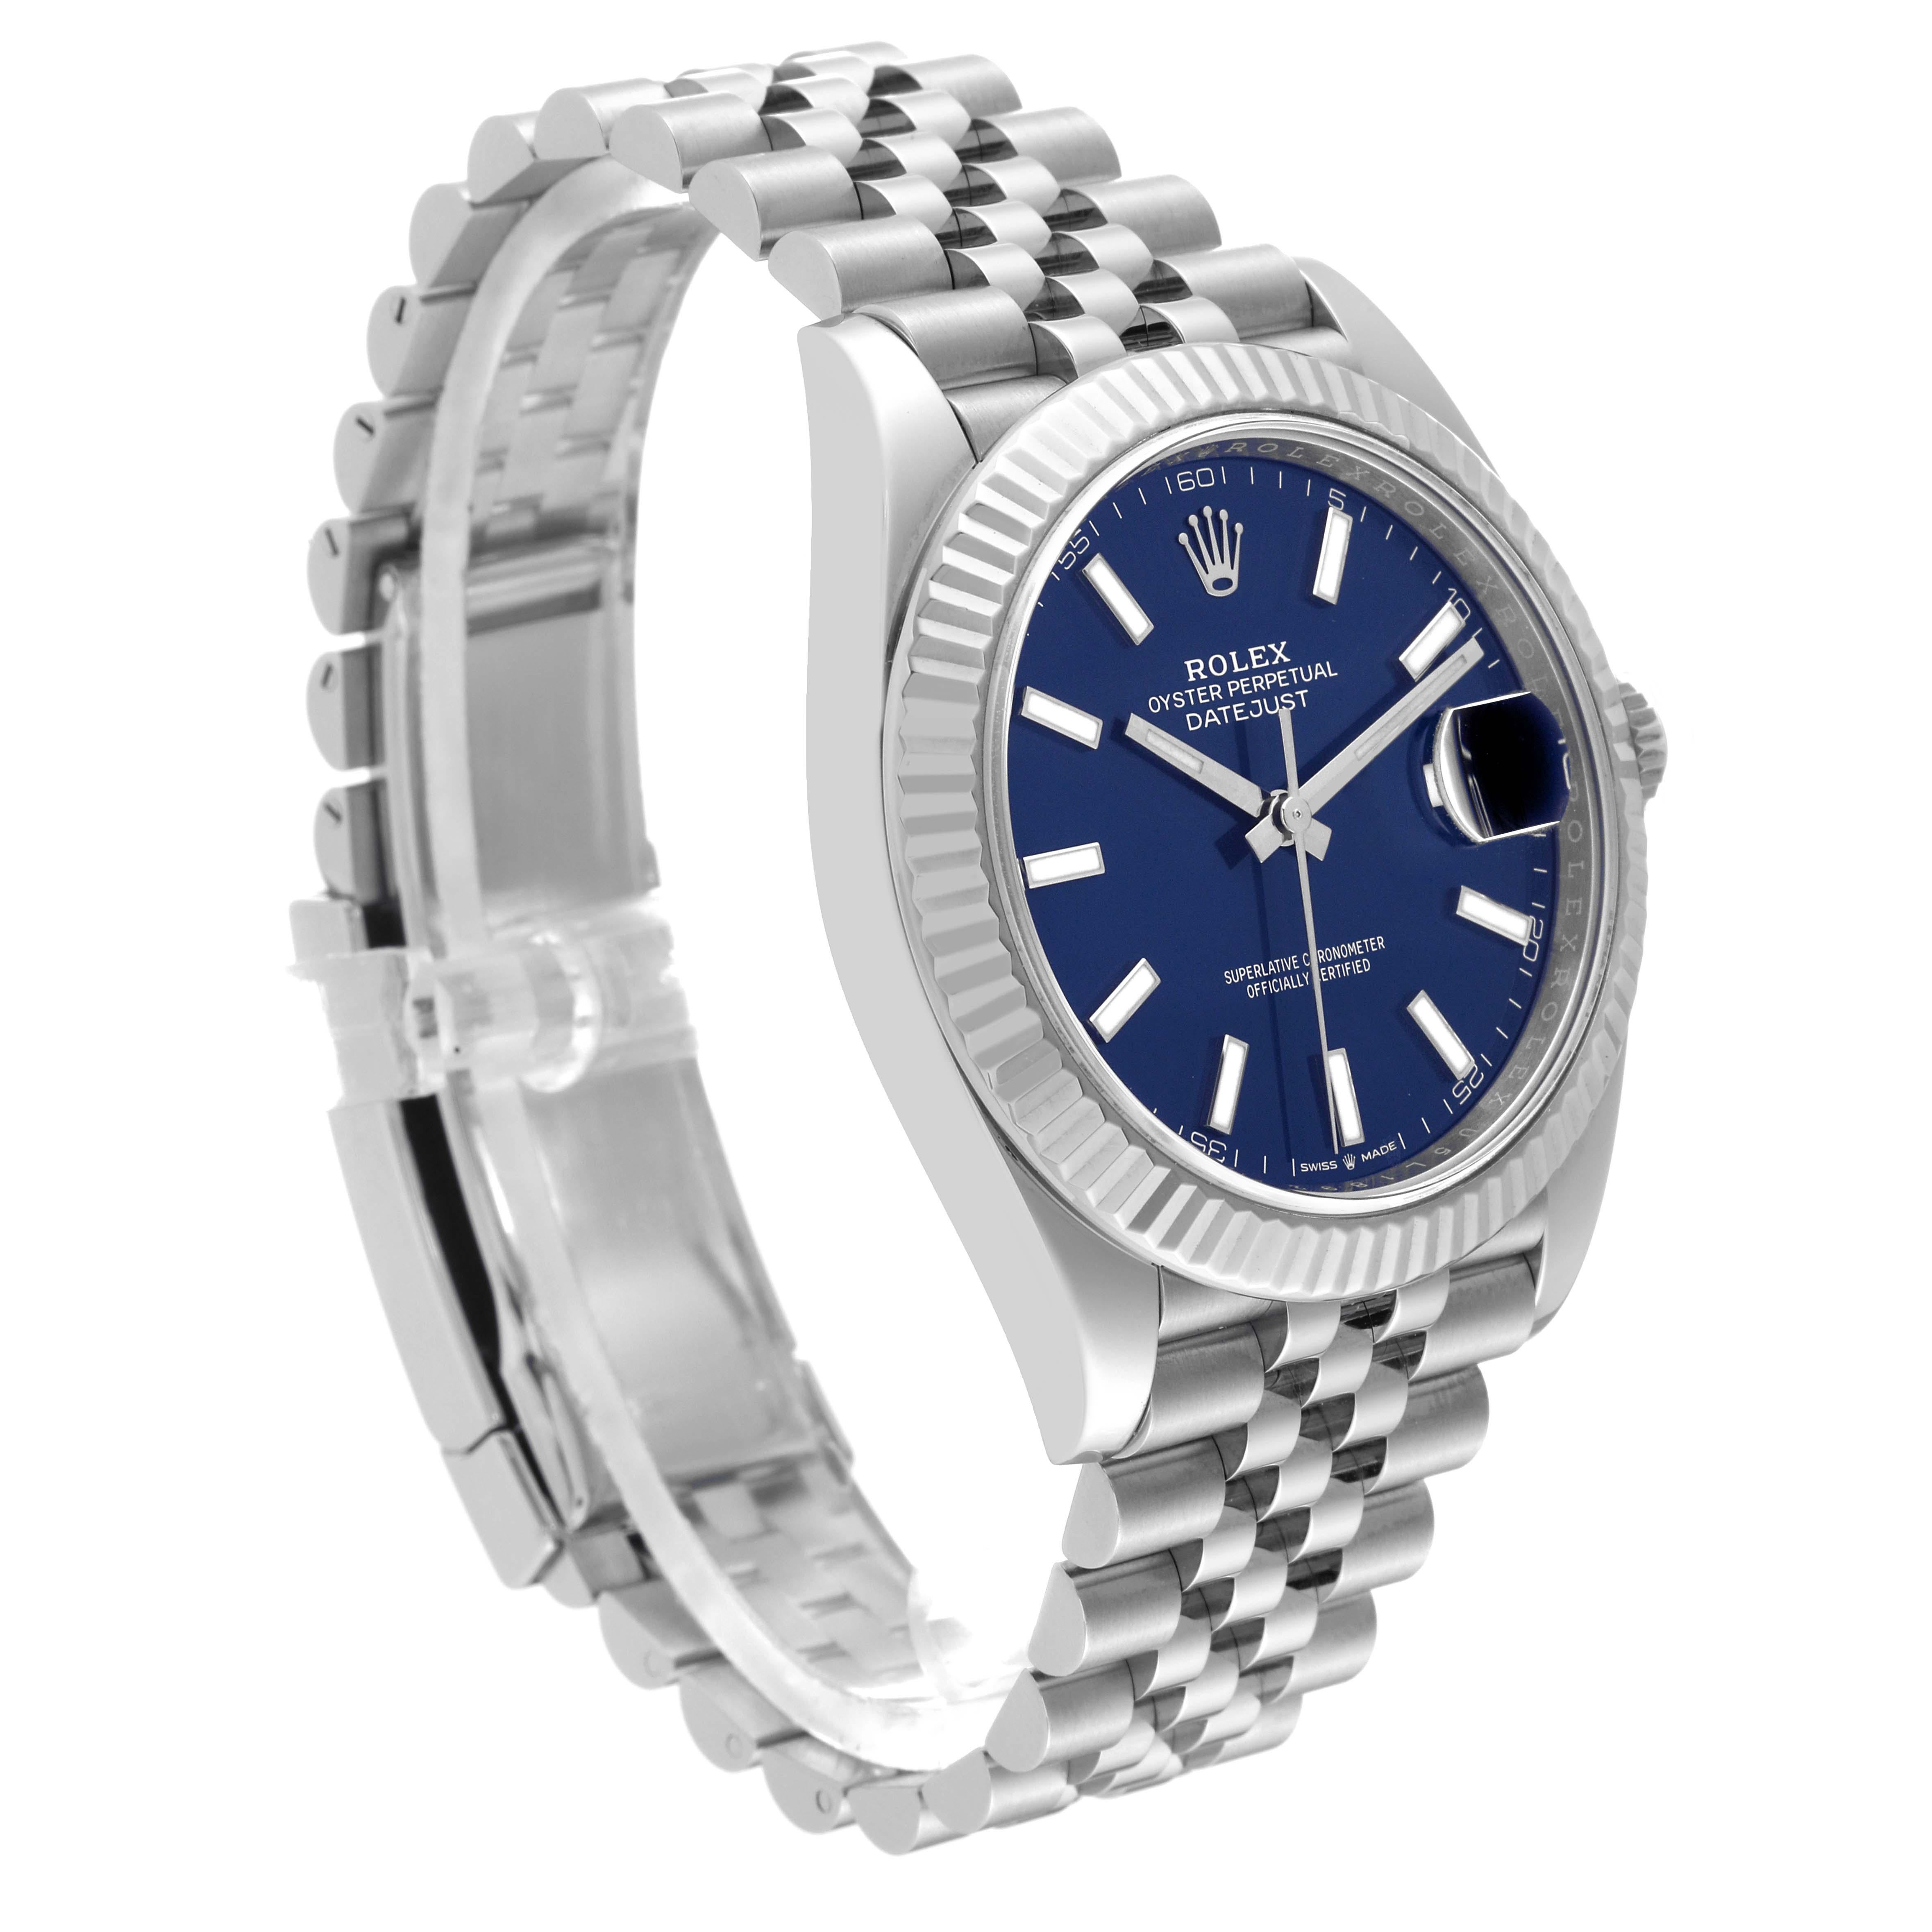 Rolex Datejust 41 Steel White Gold Blue Dial Mens Watch 126334 Box Card 2